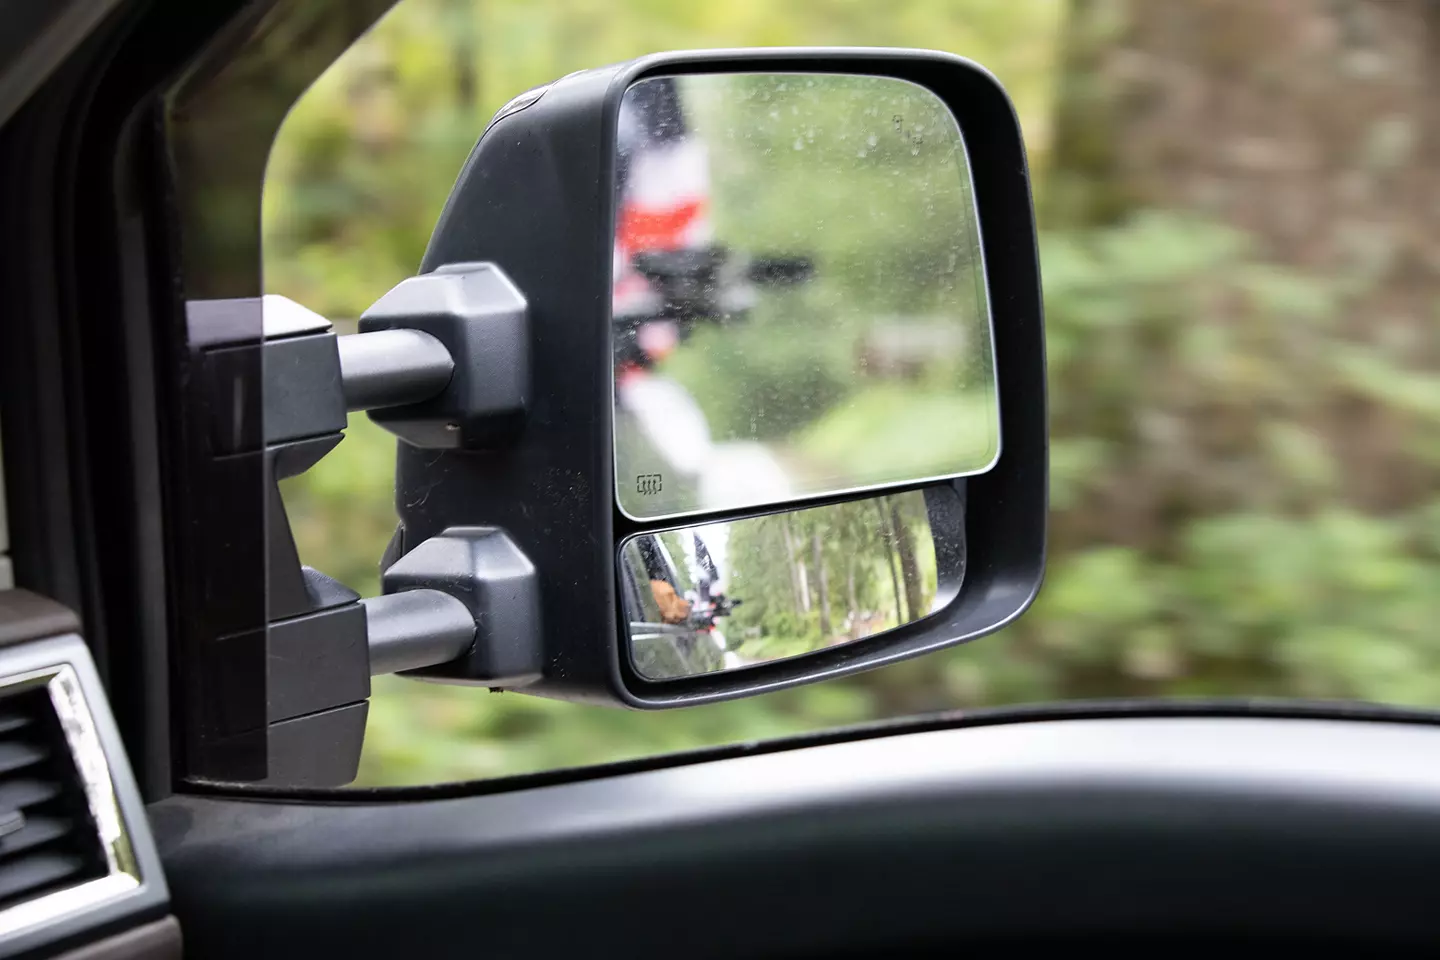 Extended rear view mirror with a blurry reflection of a dog sitting in the backseat of a truck. 